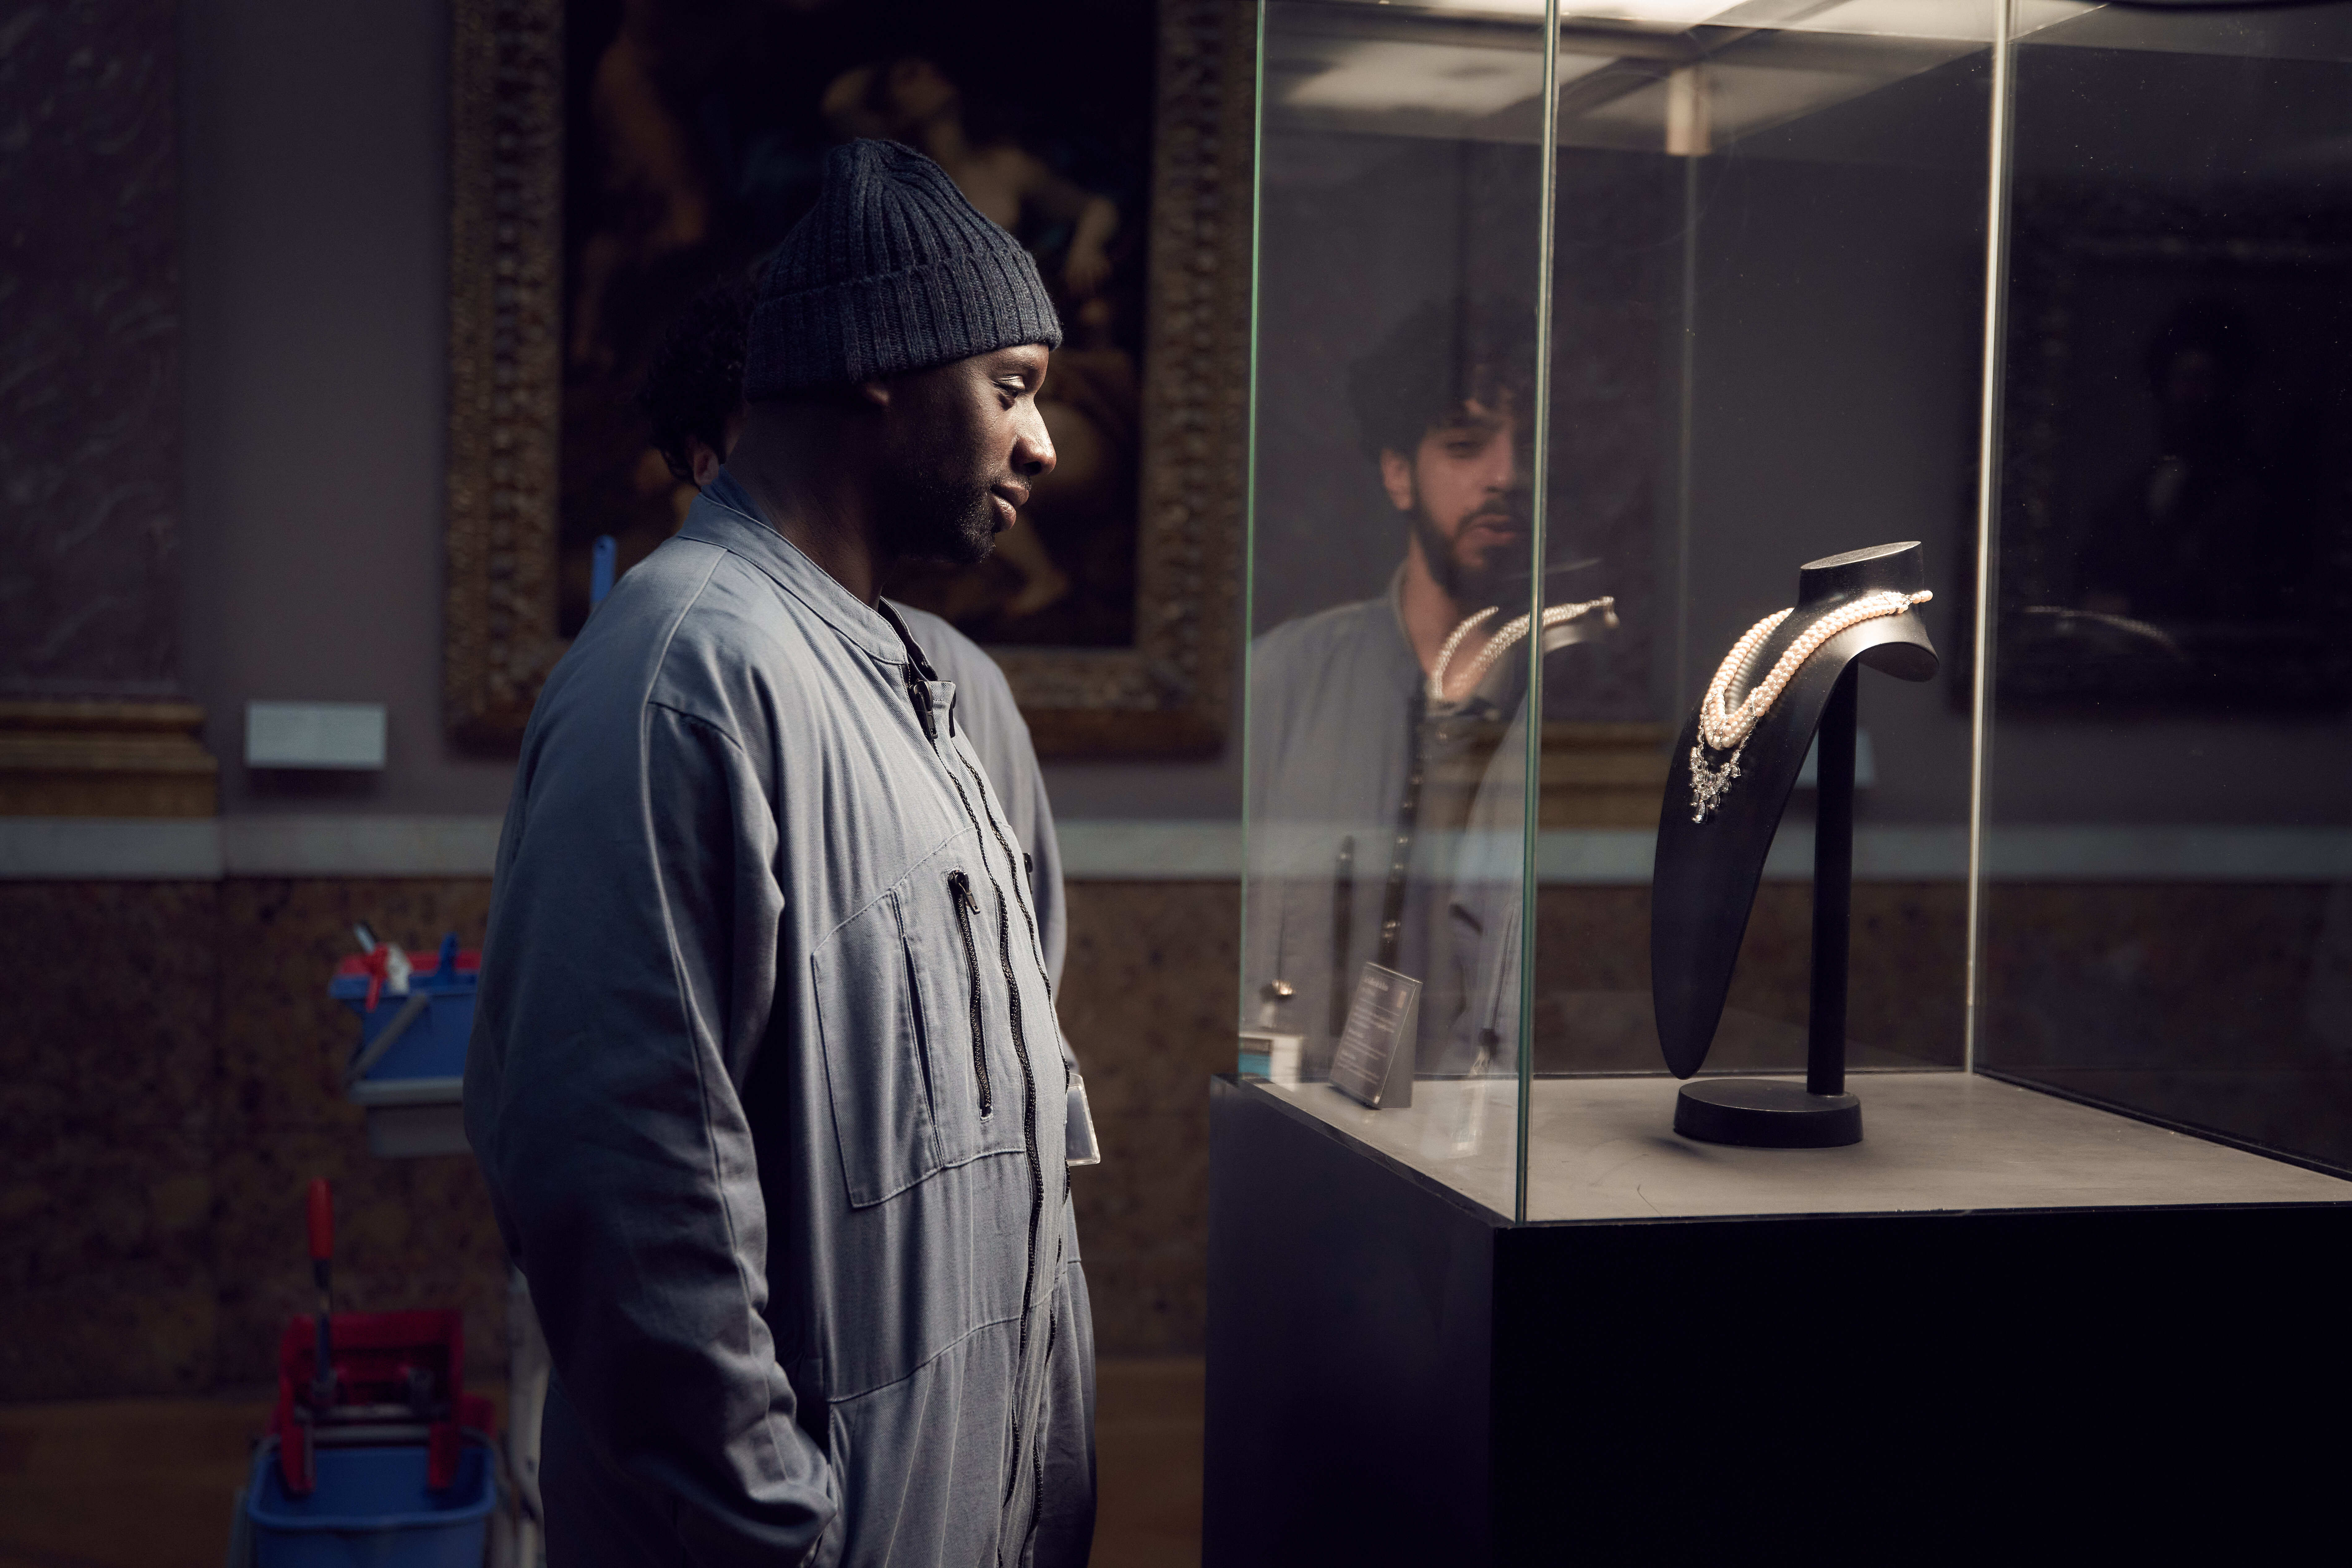 Omar Sy stands in a dimly lit gallery, looking into a glass case containing a necklace.